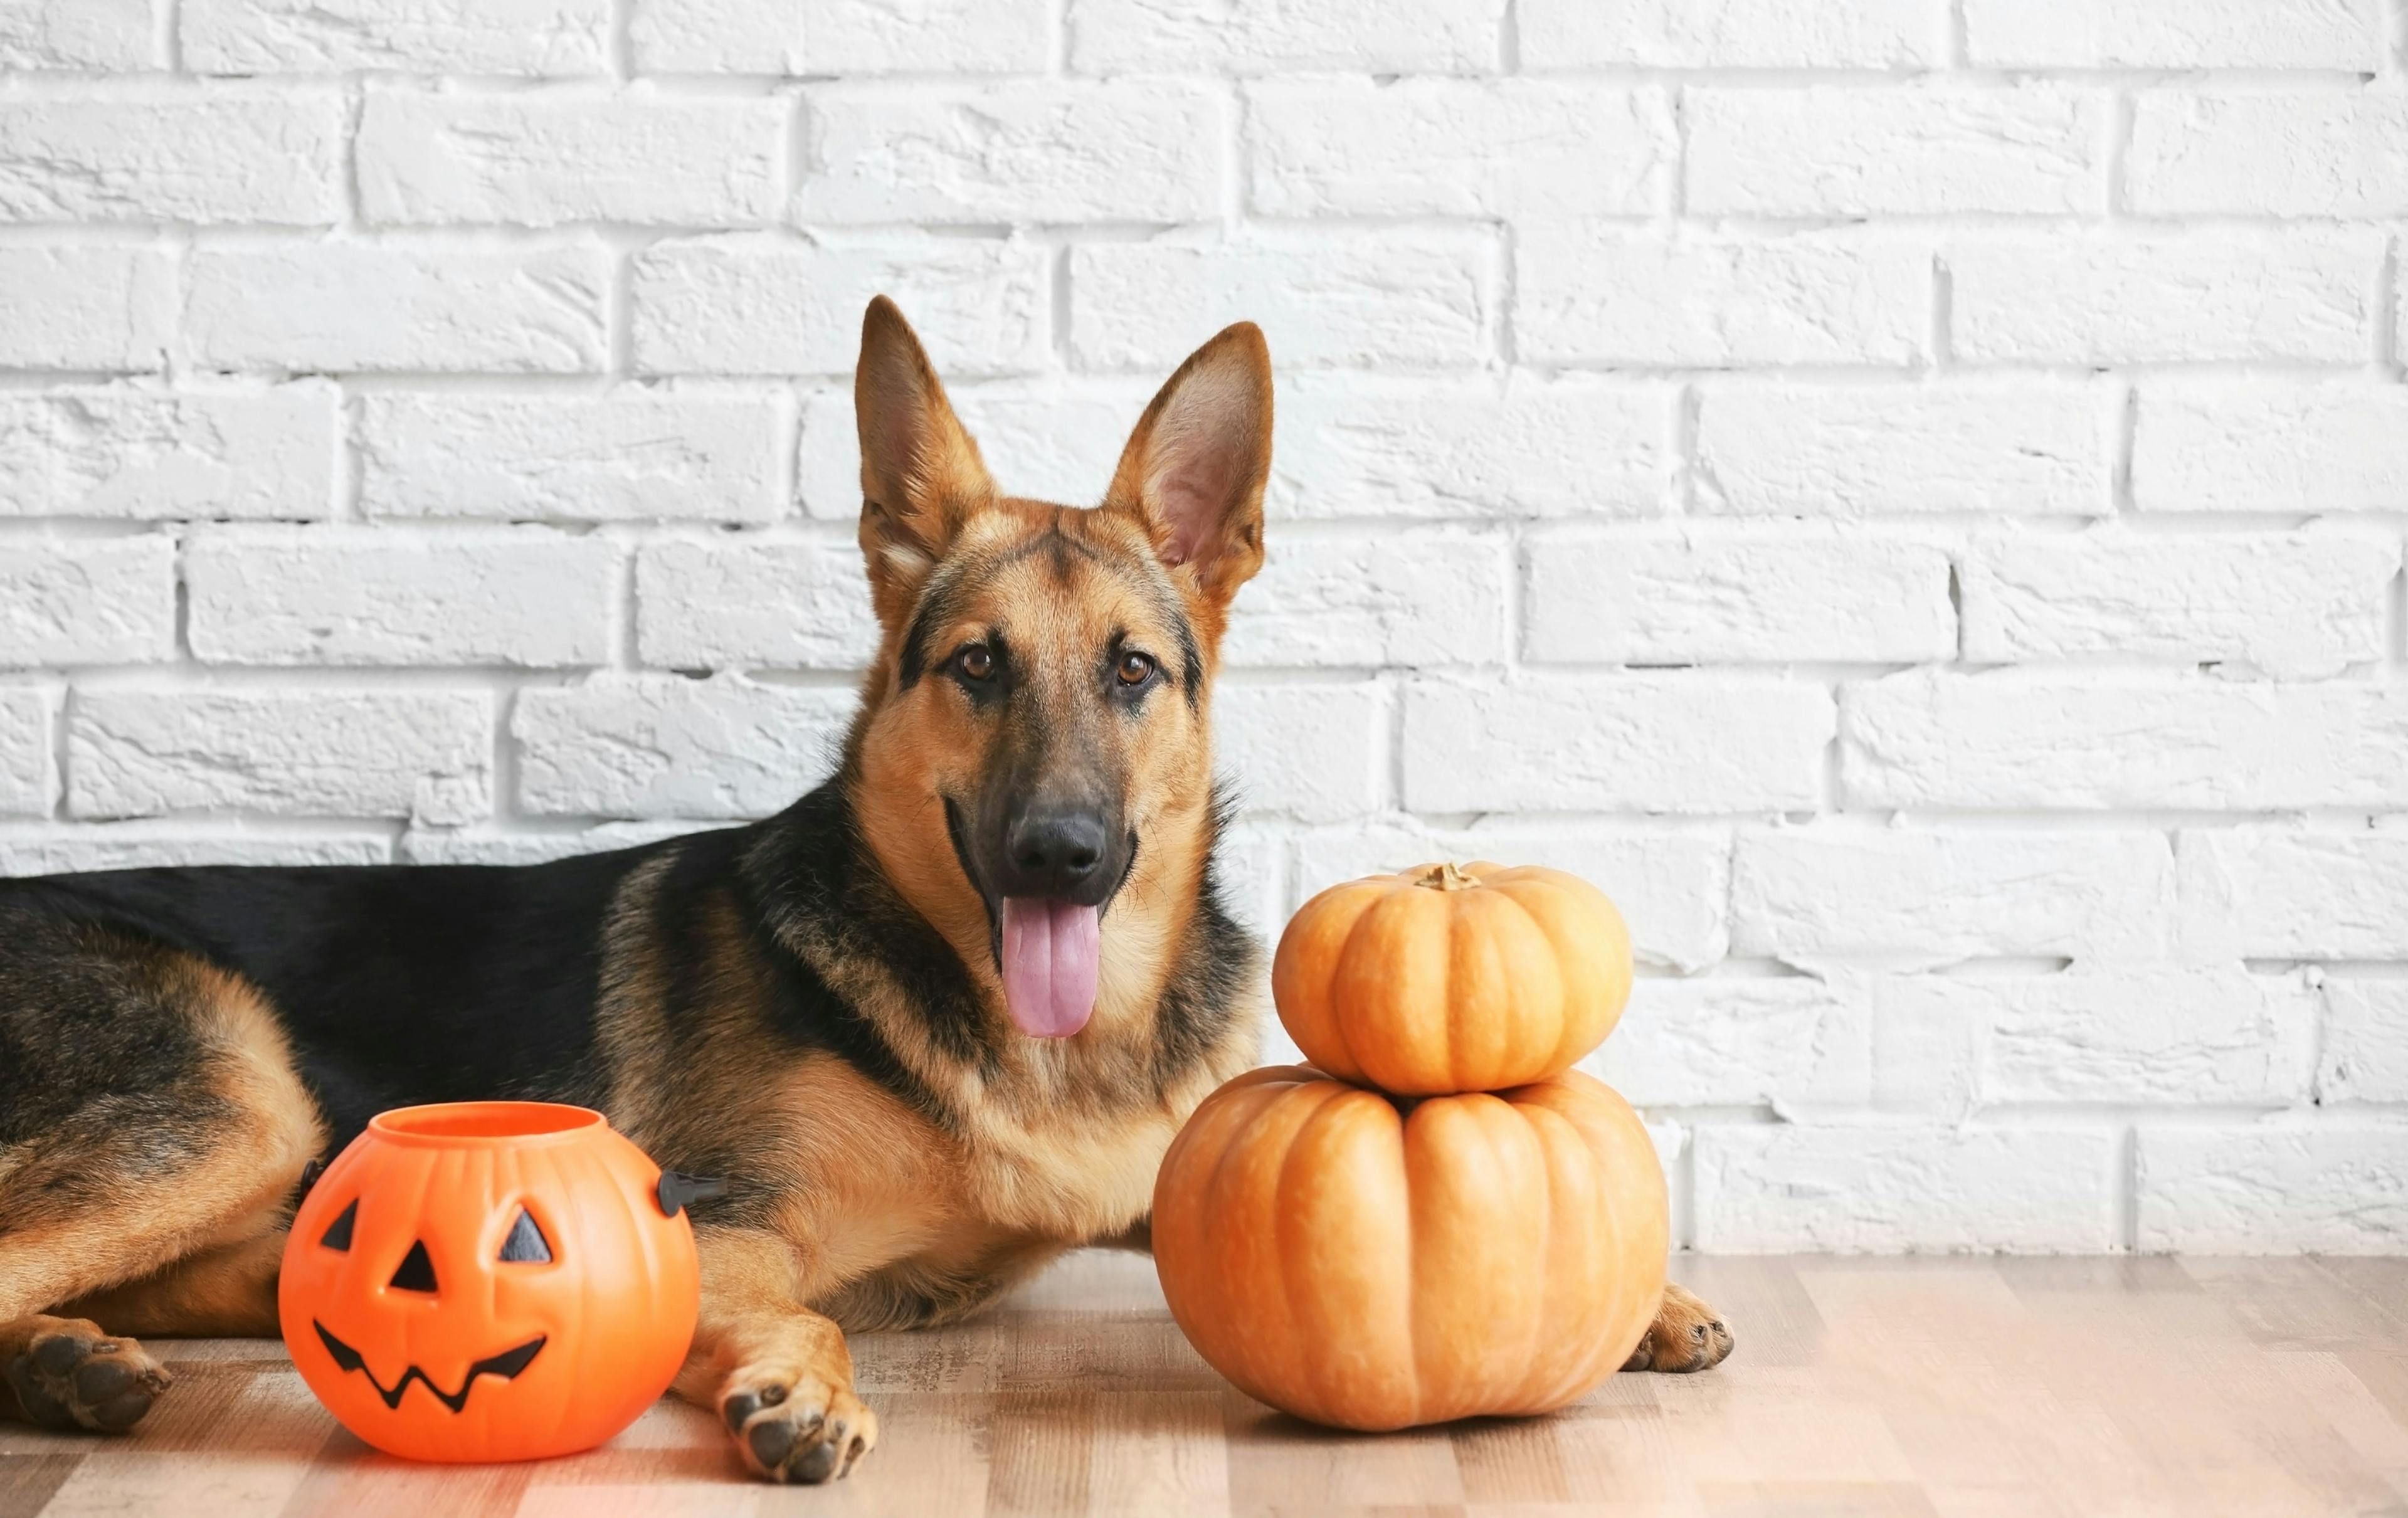 News-wrap up: This week's veterinary news, plus pet safety tips for Halloween